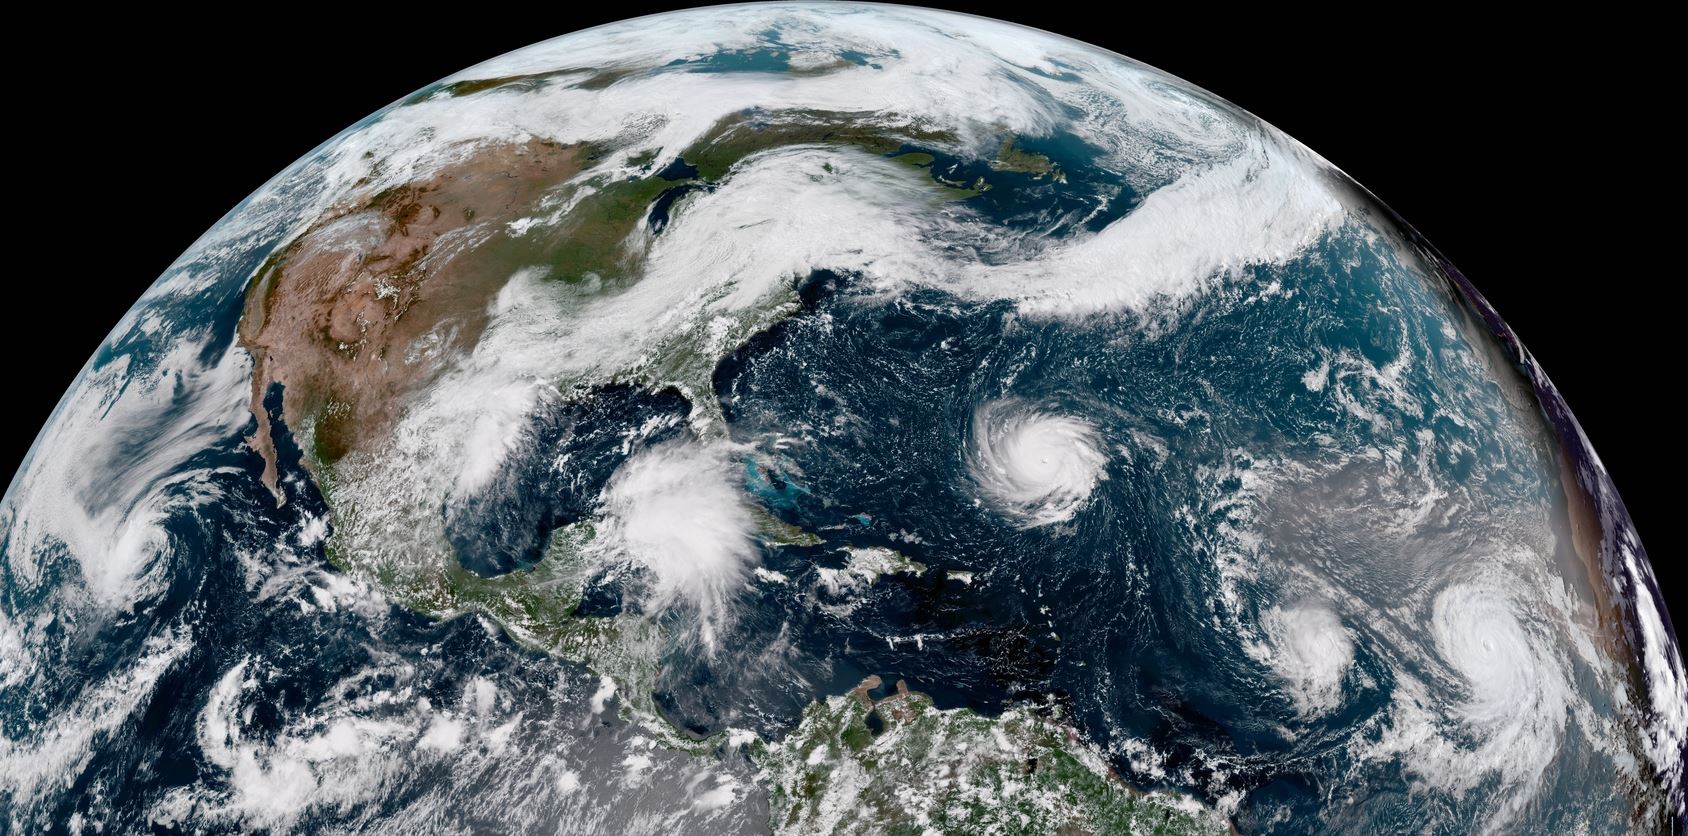 Satellite images show hurricanes lined up in Atlantic Ocean